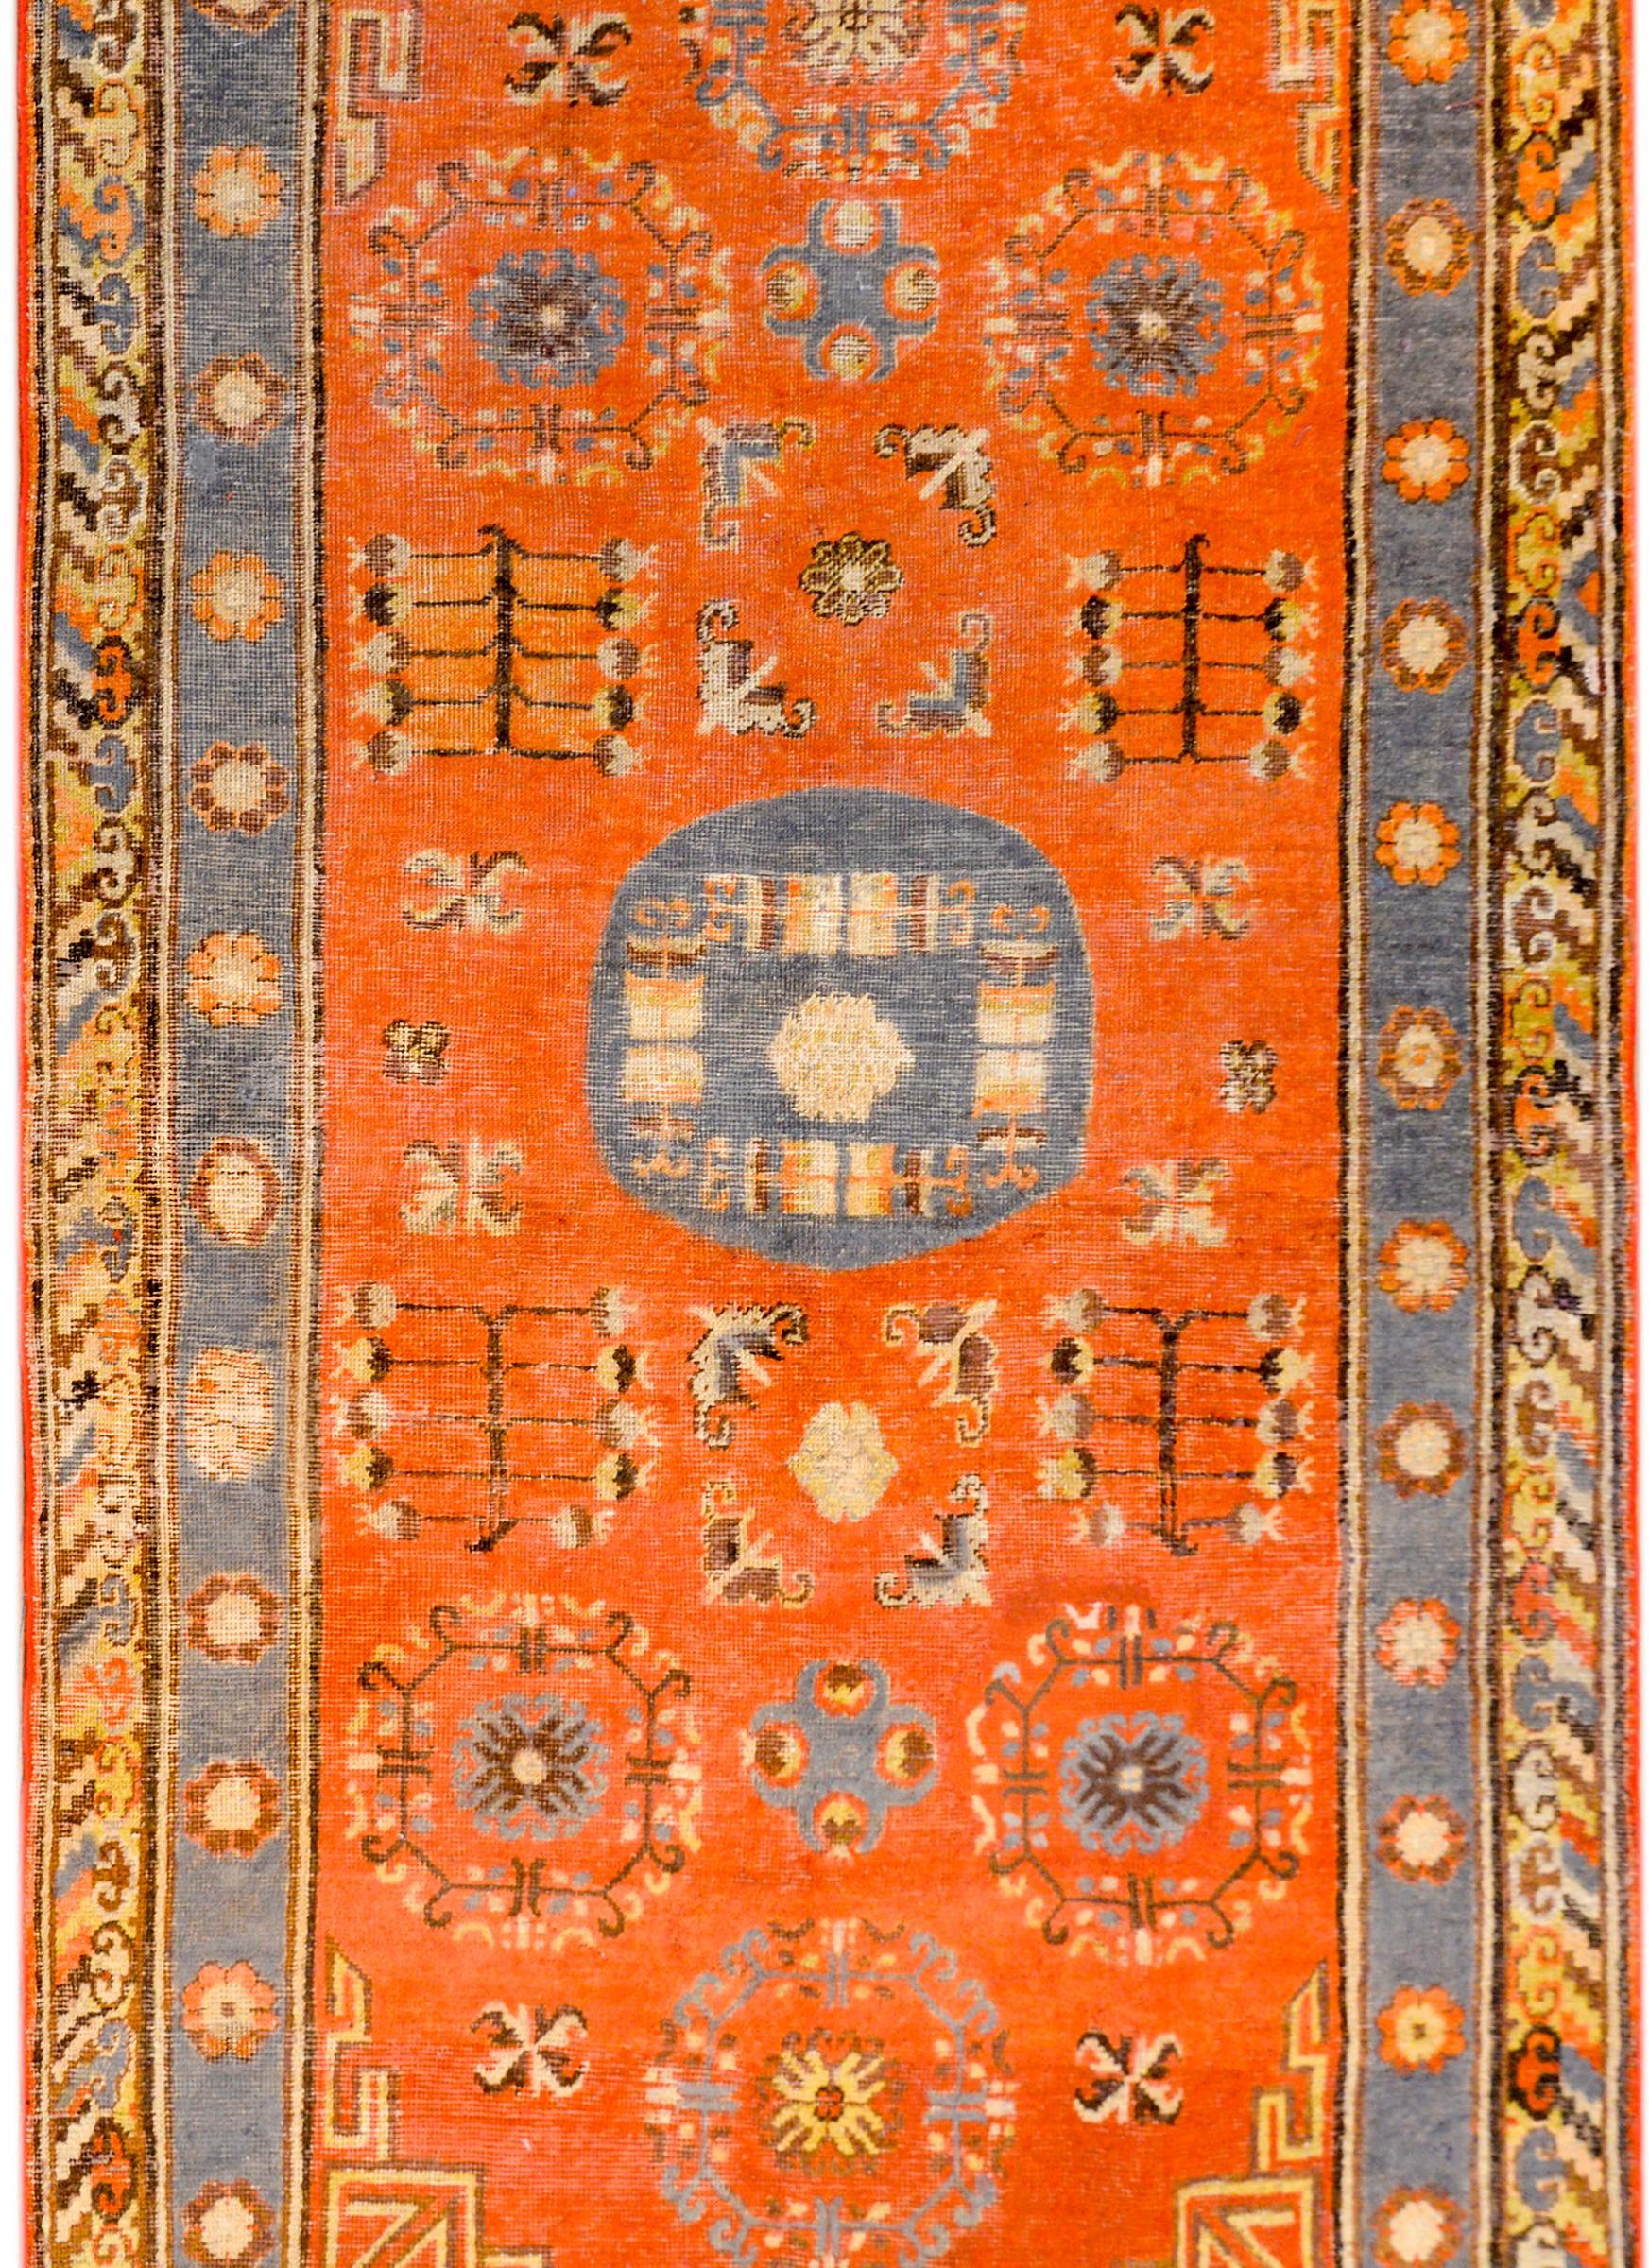 A fantastic early 20th century Central Asian Khotan rug with a beautiful pattern containing a field of stylized flowers and flowering trees-of-life on a brilliant orange colored background. The border is gorgeous, with an inner floral stripe on a